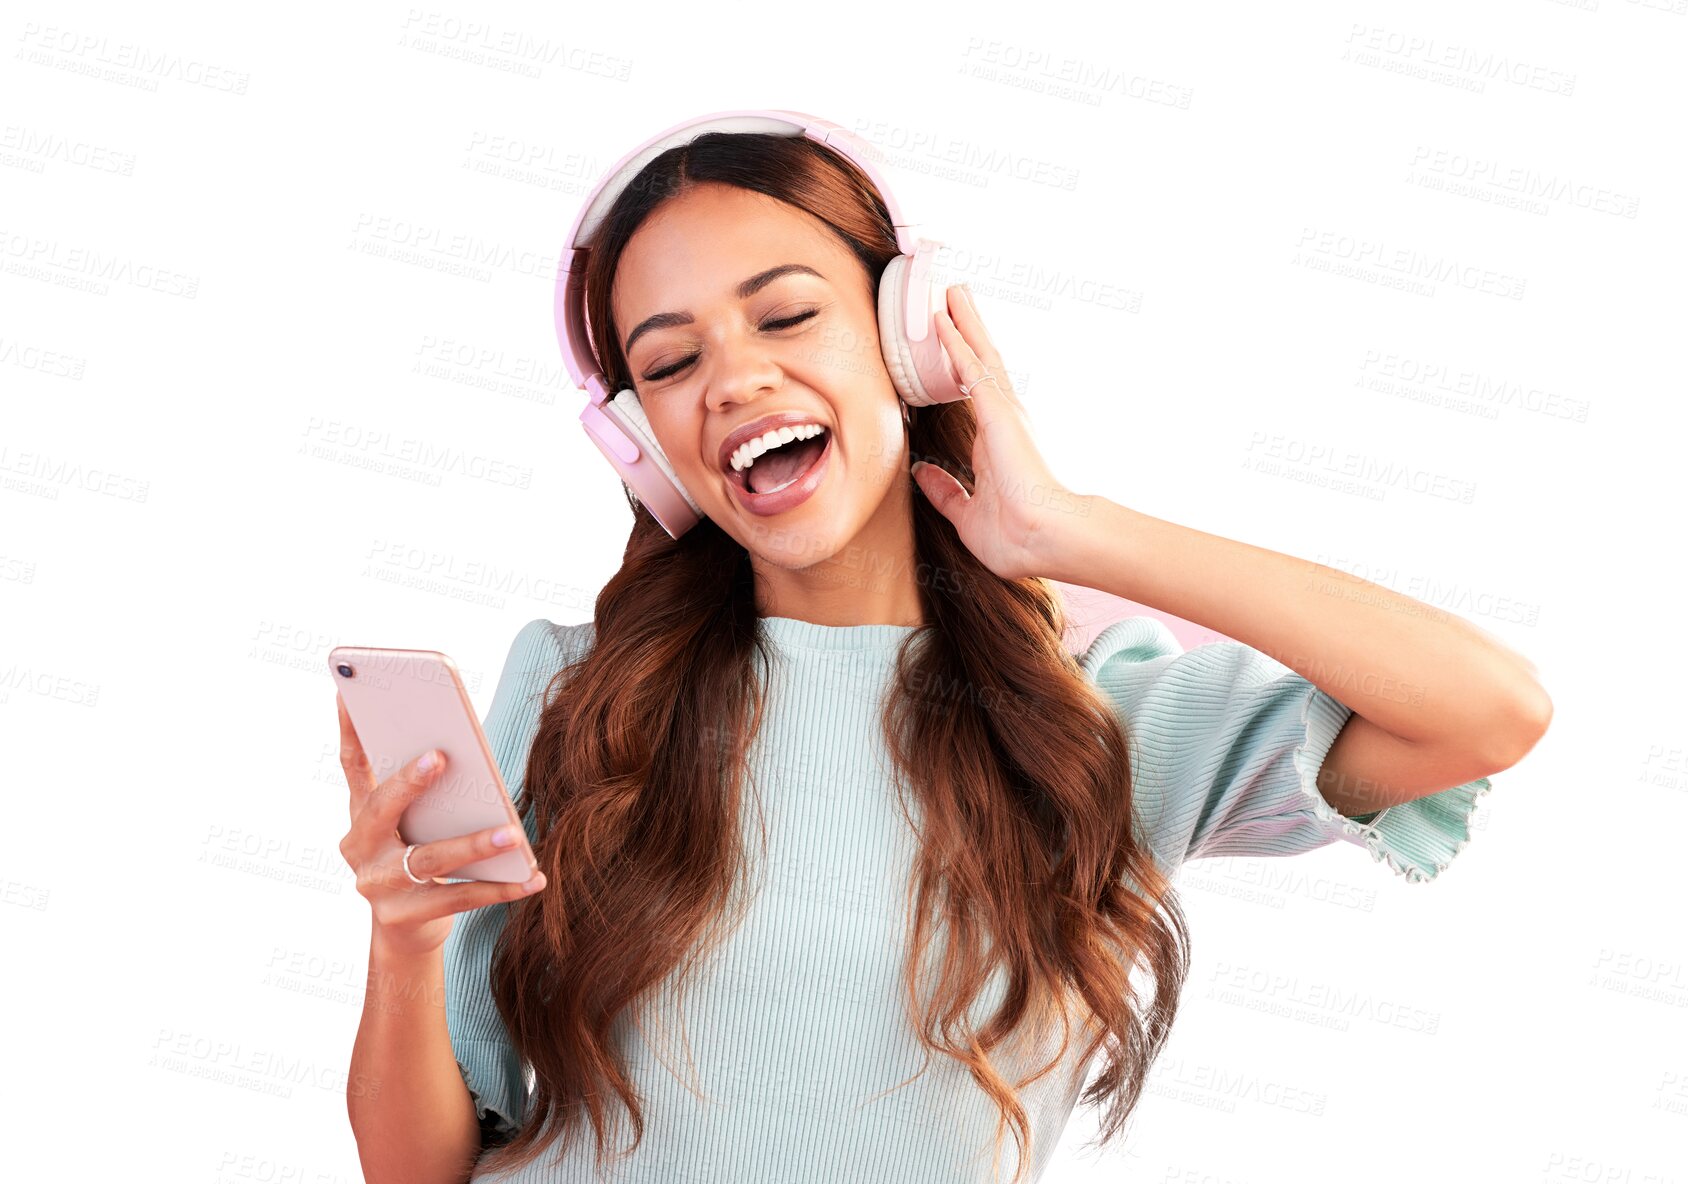 Buy stock photo Woman, headphones and singing with smartphone for music, fun app and isolated on transparent png background. Excited model, singer or listening to mobile radio, streaming sound and online audio media